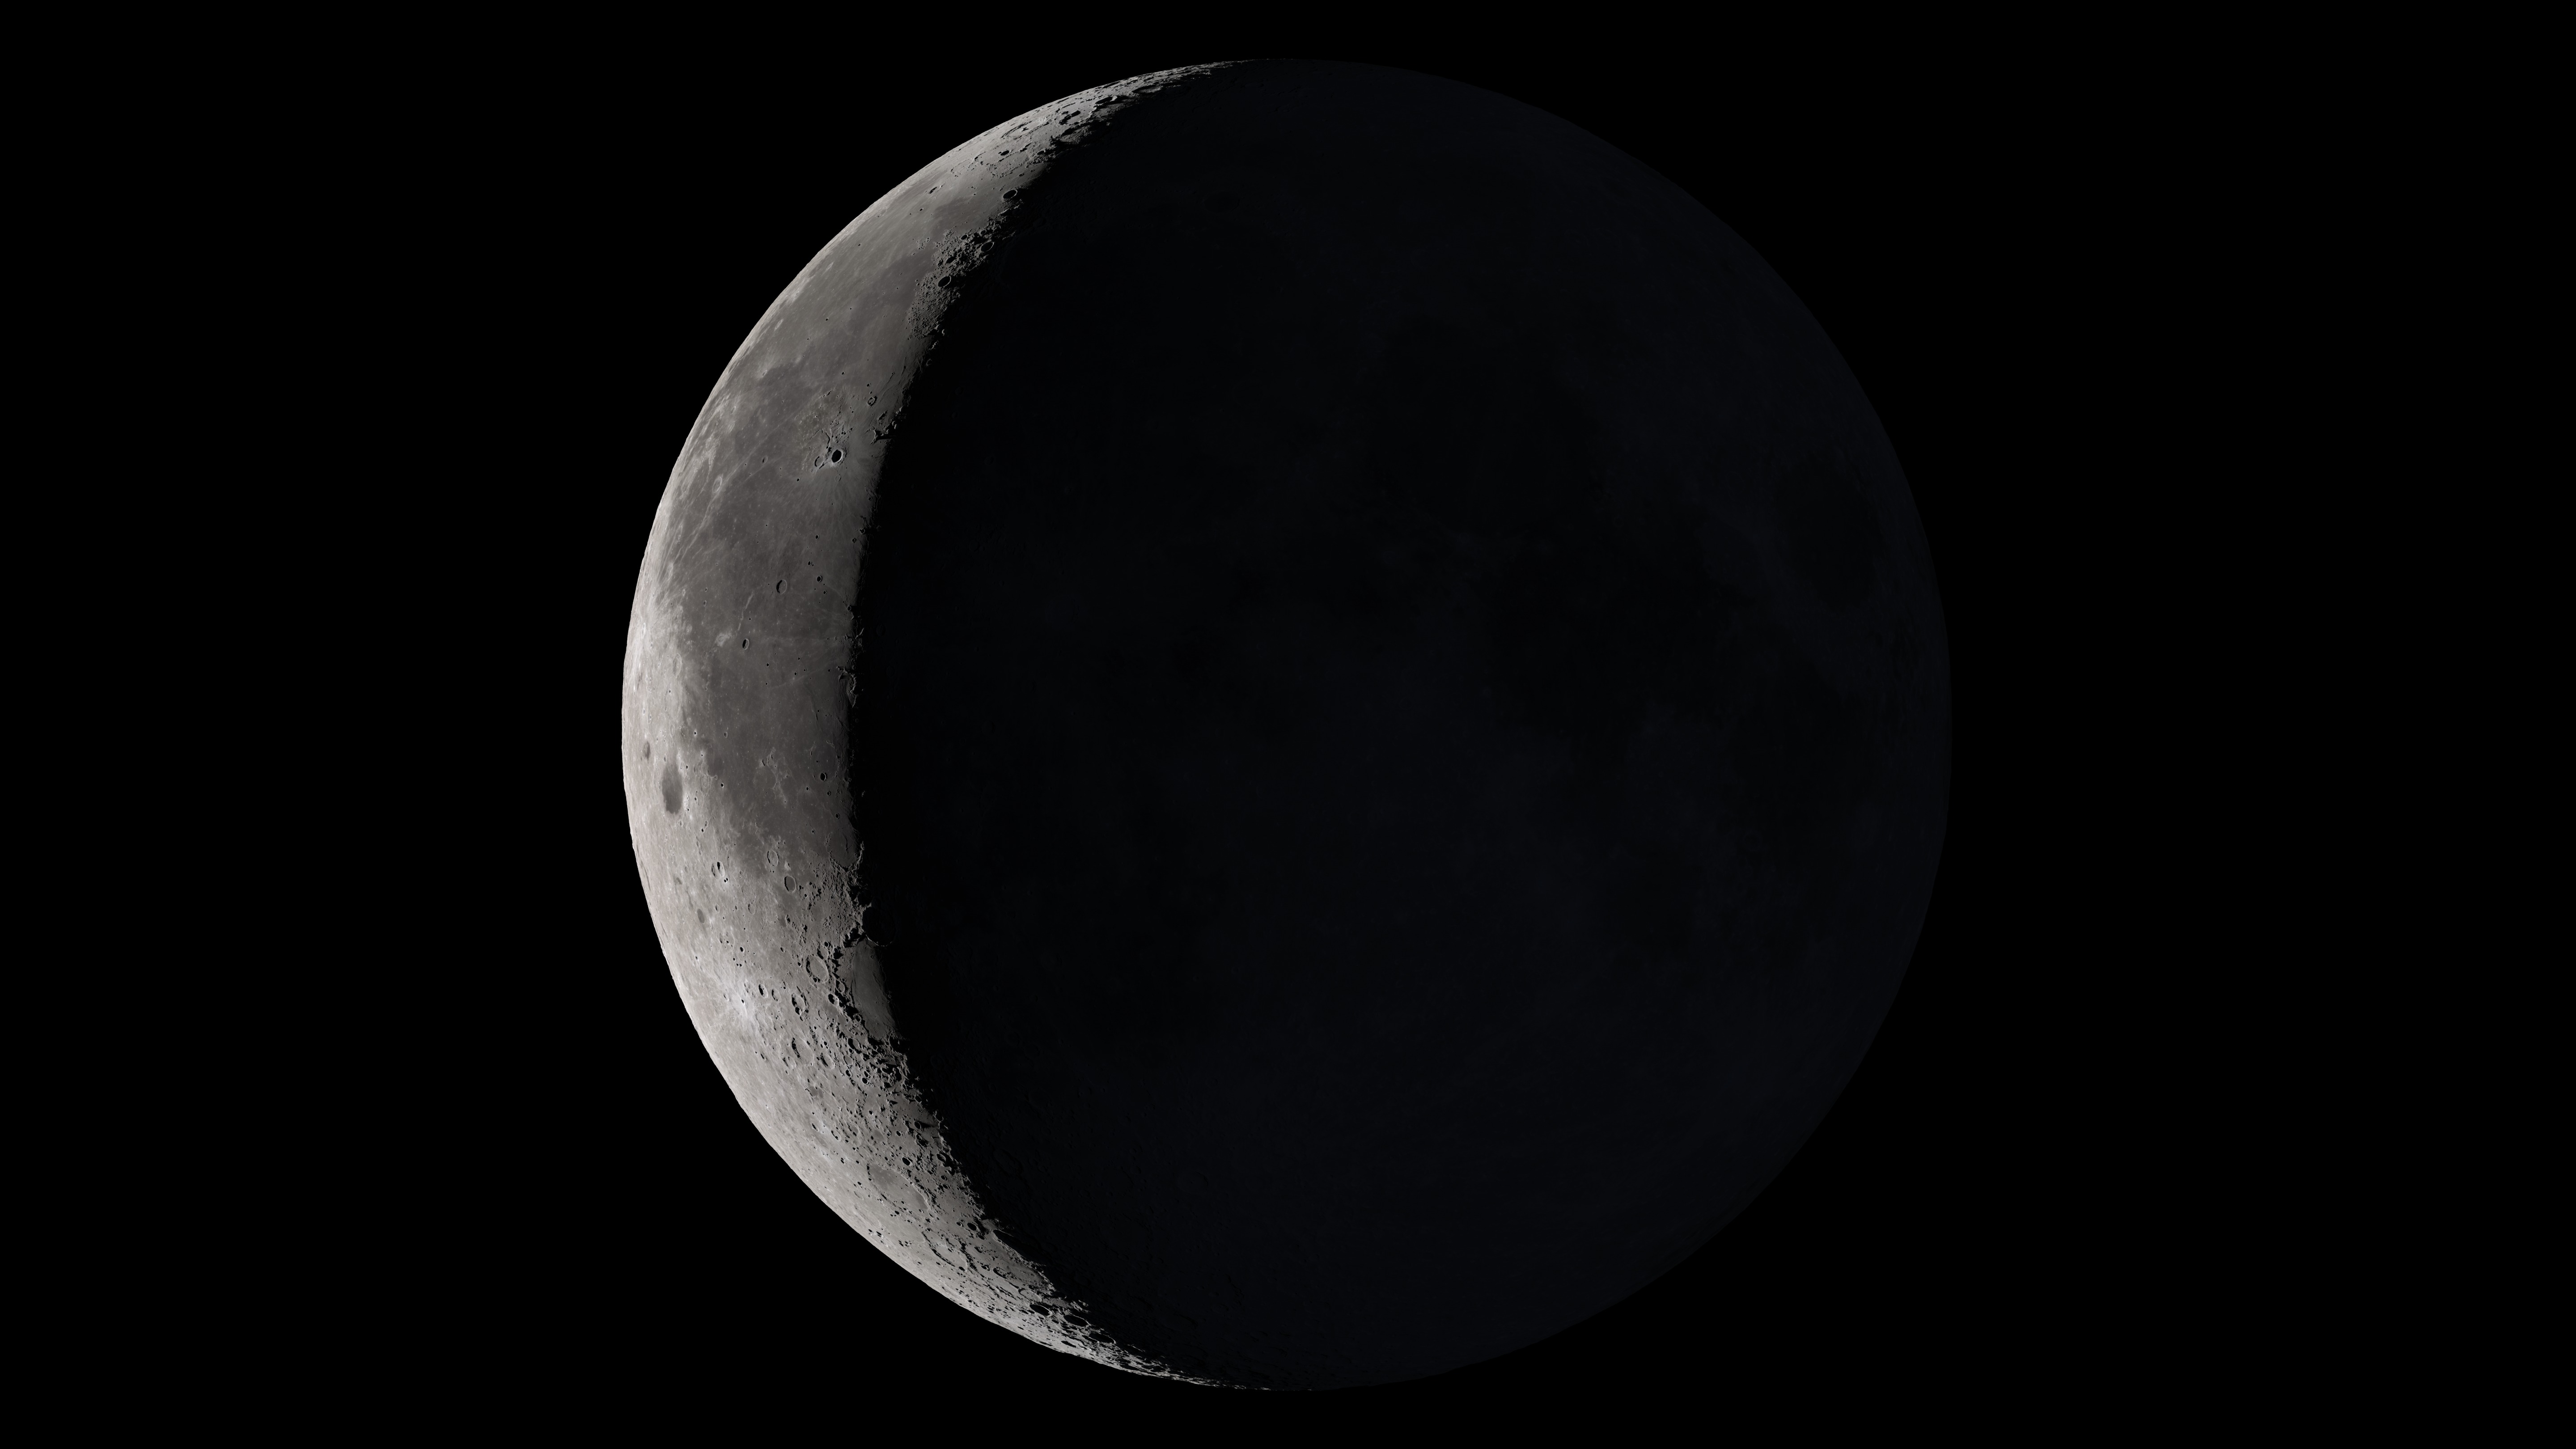 Waning crescent Moon. The lunar phases arise as the Earth-Moon-Sun angle changes as the Moon orbits the Earth. This waning crescent Moon is 25 days into its 28-day cycle. On a waning Moon, the day-night line (terminator) marks the lunar sunset as night advances over the Earth-facing side of the Moon. The Moon is crescent when it is less than half full. This image, published in 2015, uses data from the Lunar Reconnaissance Orbiter. The image is part of a sequence of lunar phases (see images C030/3708-3714), orientated for the northern hemisphere.